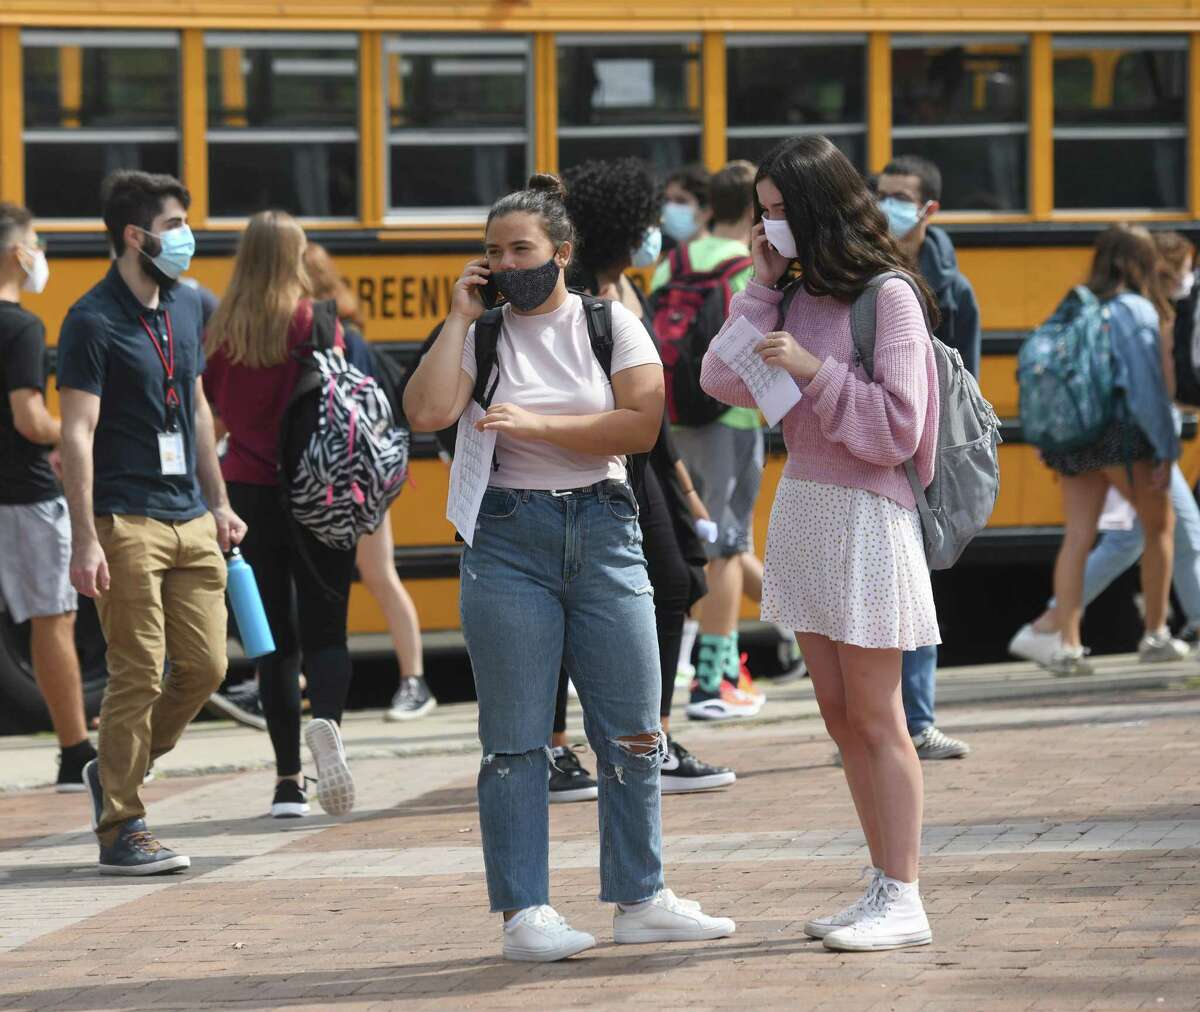 Students at Greenwich High School on the first day of classes last September. The district’s plans for the new school year, which begins Sept. 1, are not set yet but a meeting will be held Monday to update parents.